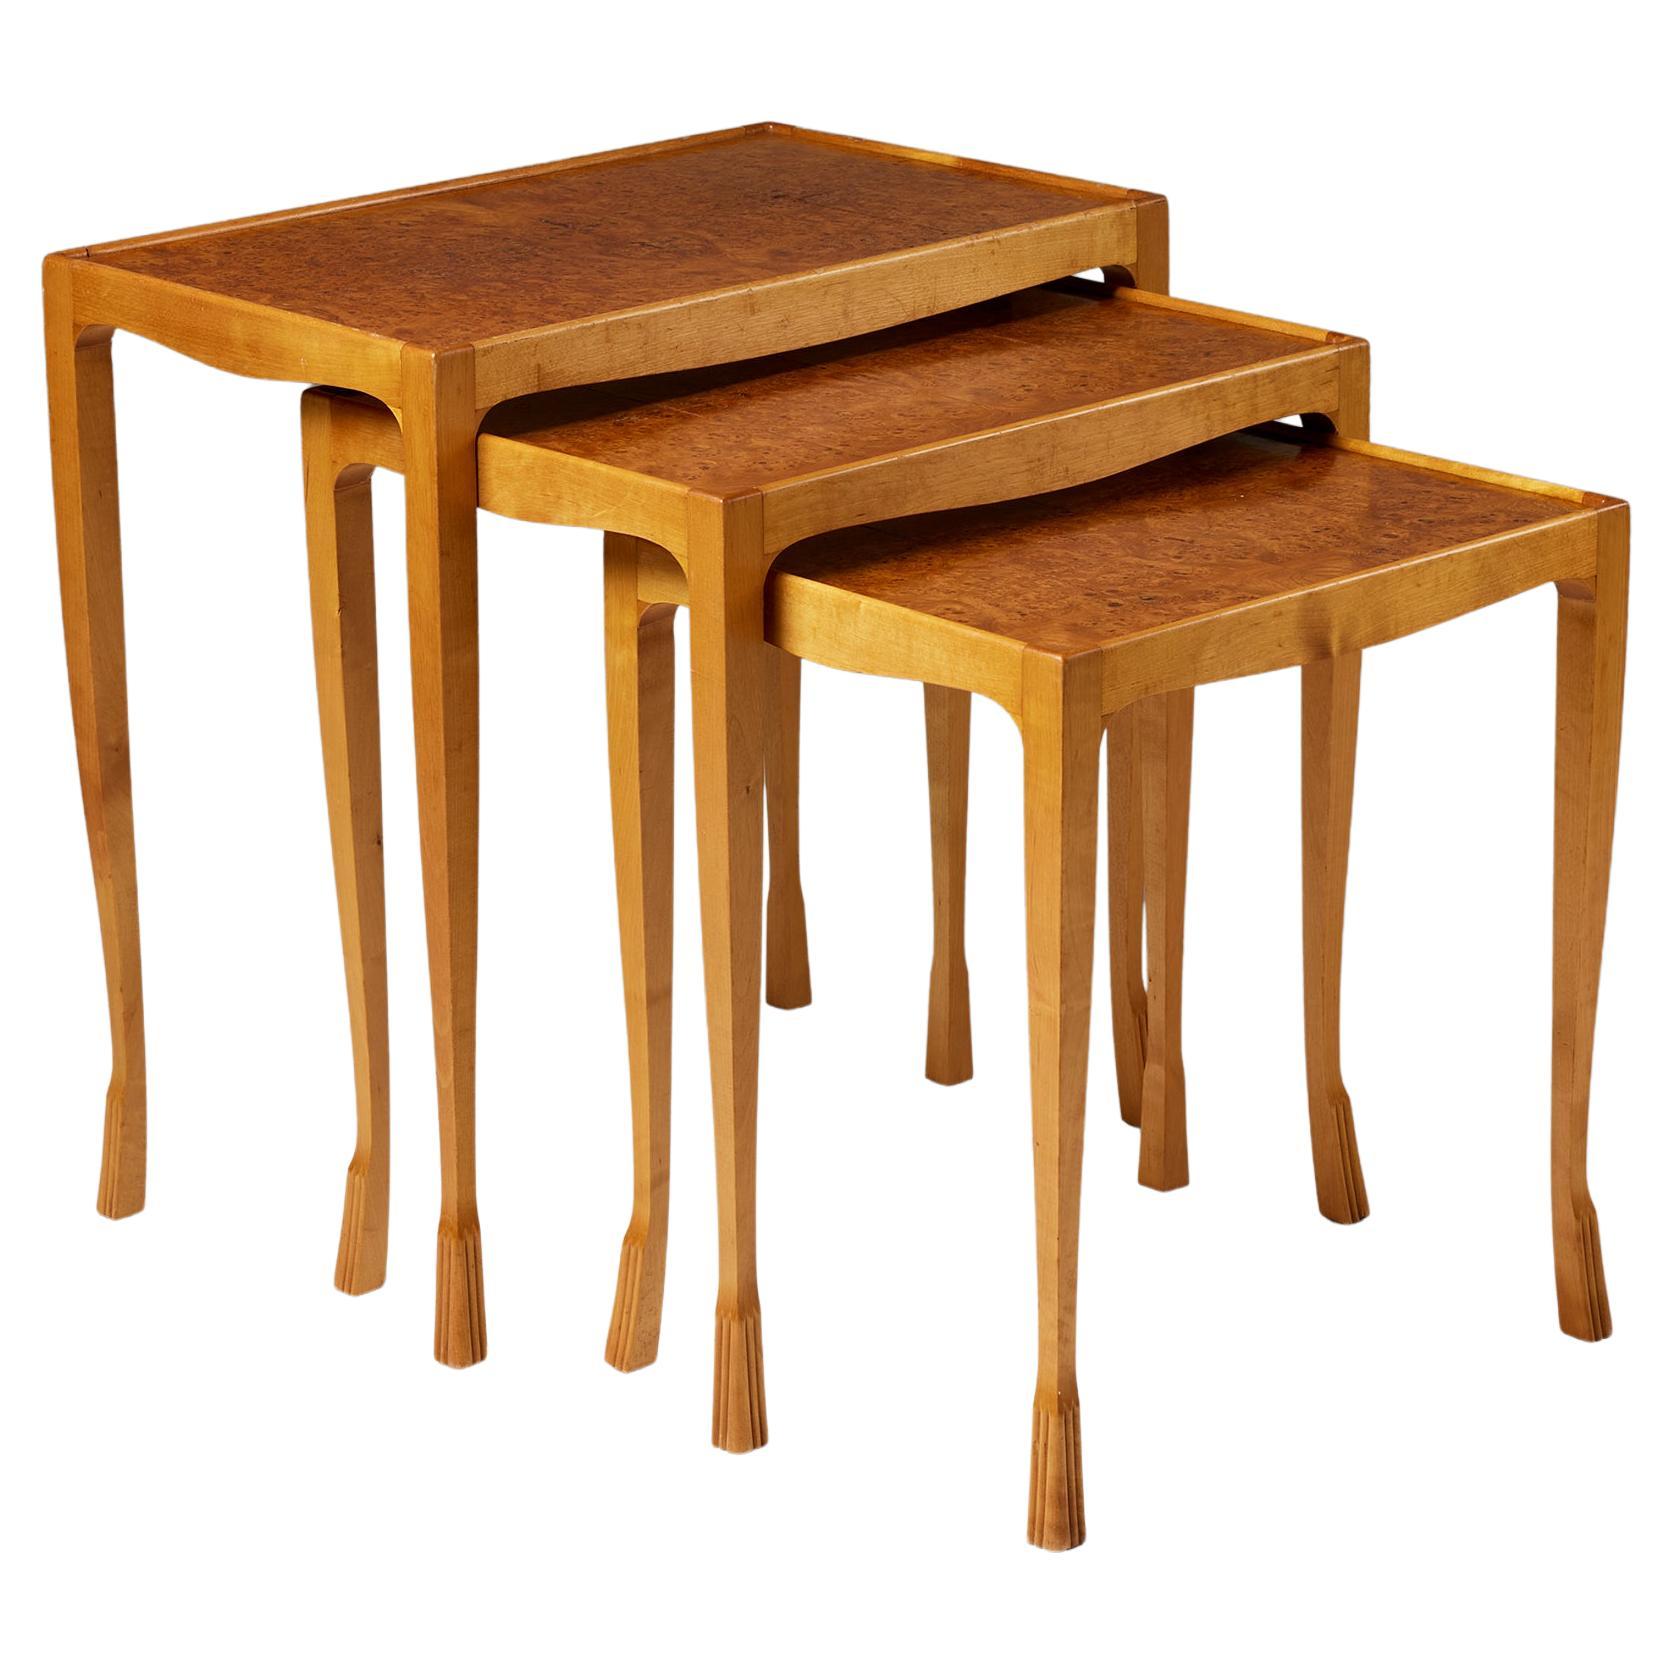 Set of three Swedish Grace nesting tables, anonymous,
Sweden, 1940s.

Birch and root veneer.

Signed.

Small:
H: 46 cm 
W: 42 cm
D: 33 cm

Medium:
H: 51 cm
W: 47.5 cm
D: 33 cm

Large:
H: 56 cm
W: 54 cm
D: 33 cm

One of the briefest, yet among the